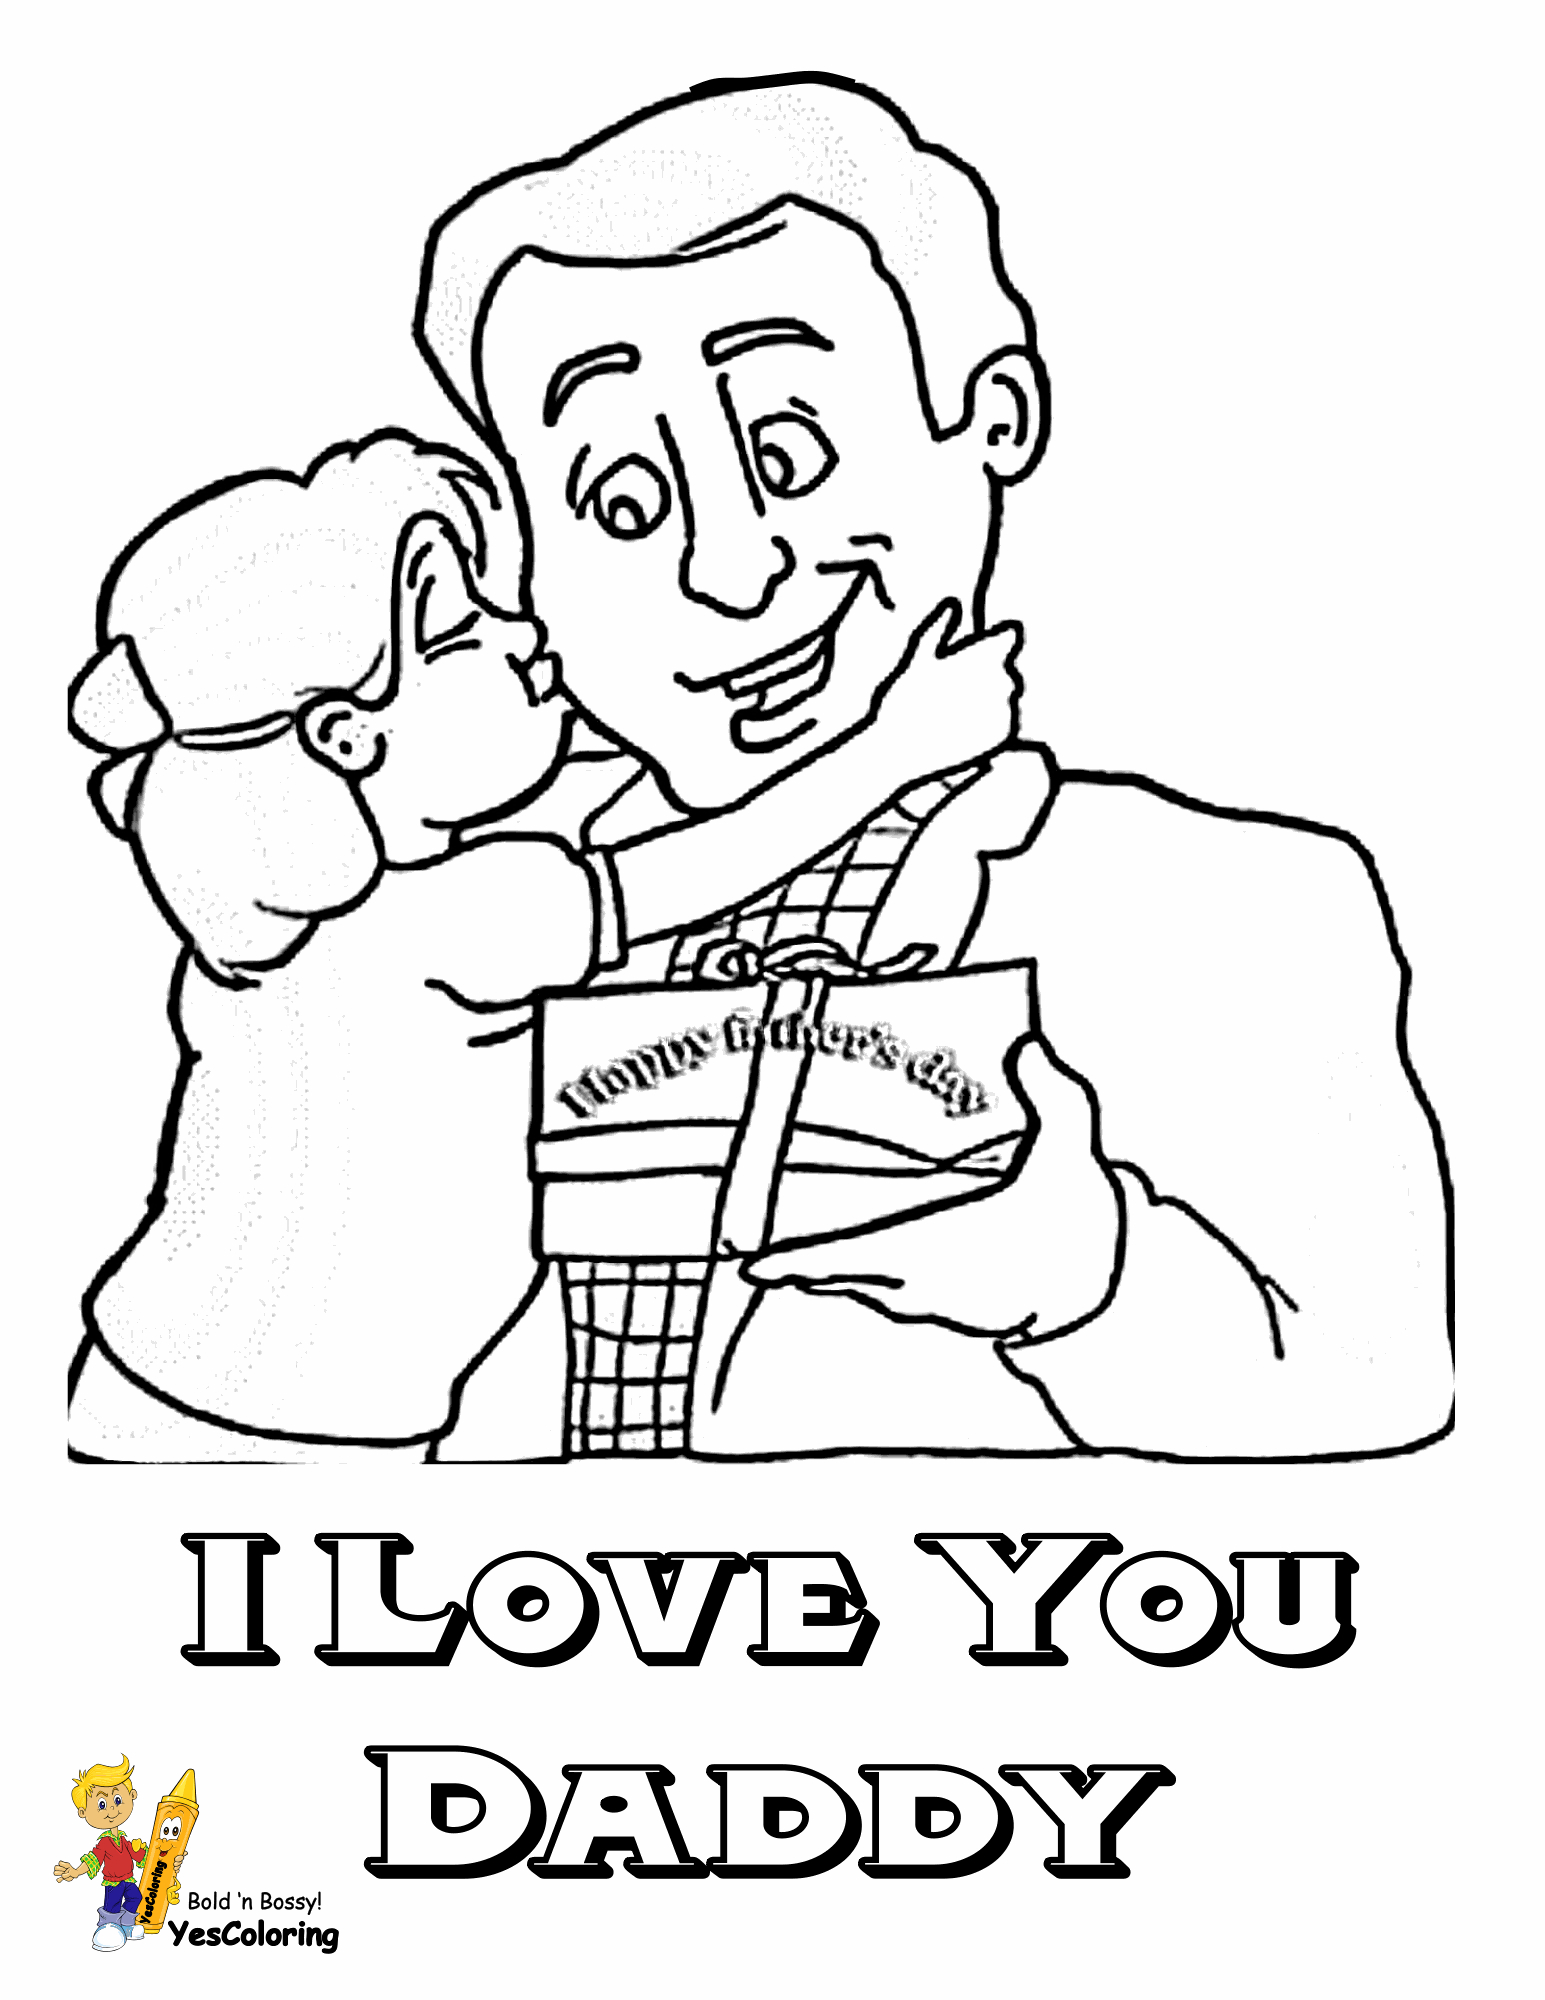 Daddy Coloring Pages Cool Father Day Coloring Pages Fathers Day Free Holiday Coloring